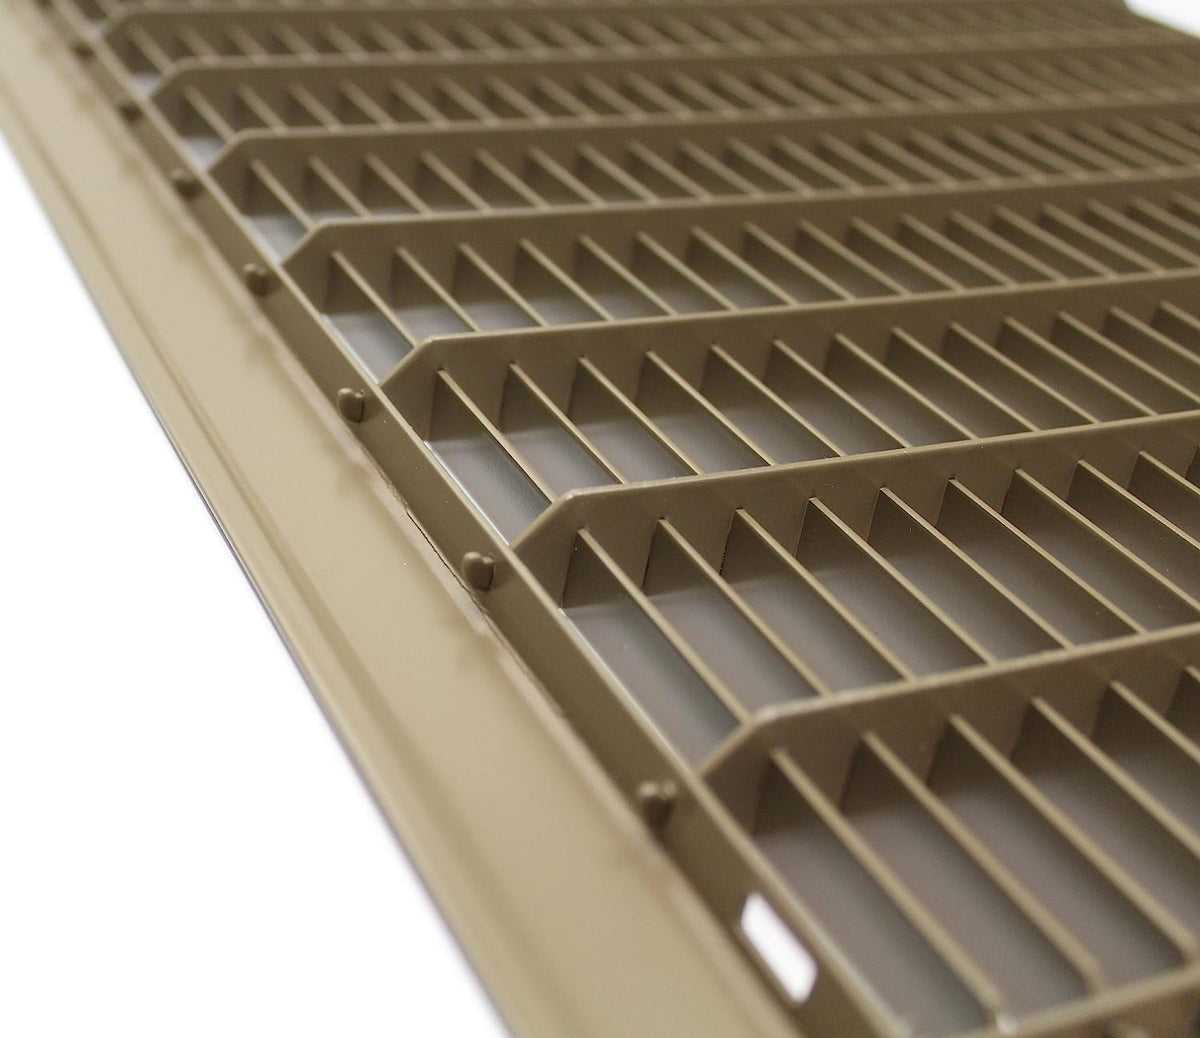 4&quot; X 10&quot; or 10&quot; X 4&quot; Heavy Duty Floor Grille - Fixed Blades Air Grille - Brown [Outer Dimensions: 5.75 X 11.75]